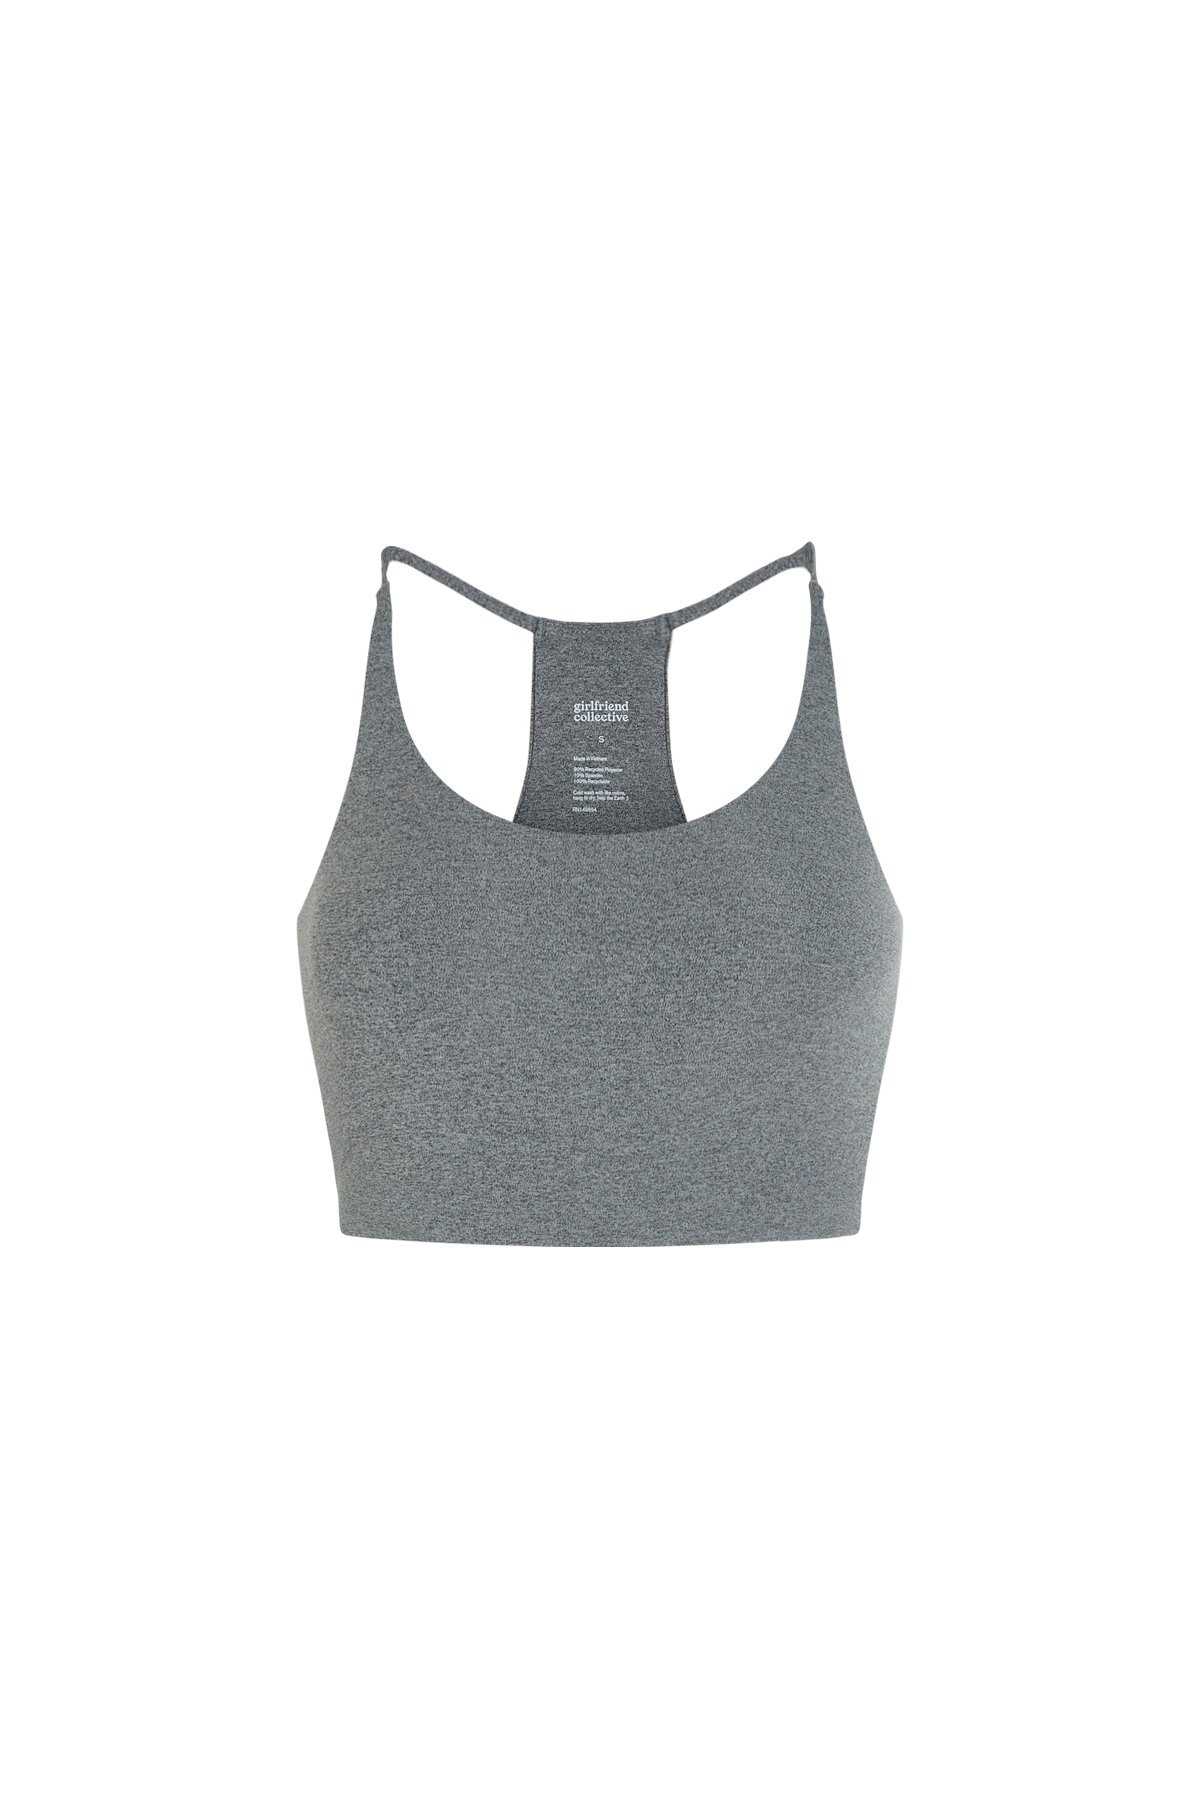 Girlfriend Collection Women's Cleo Bra - Made from Recycled Plastic Bottles, Heather Gravel / L